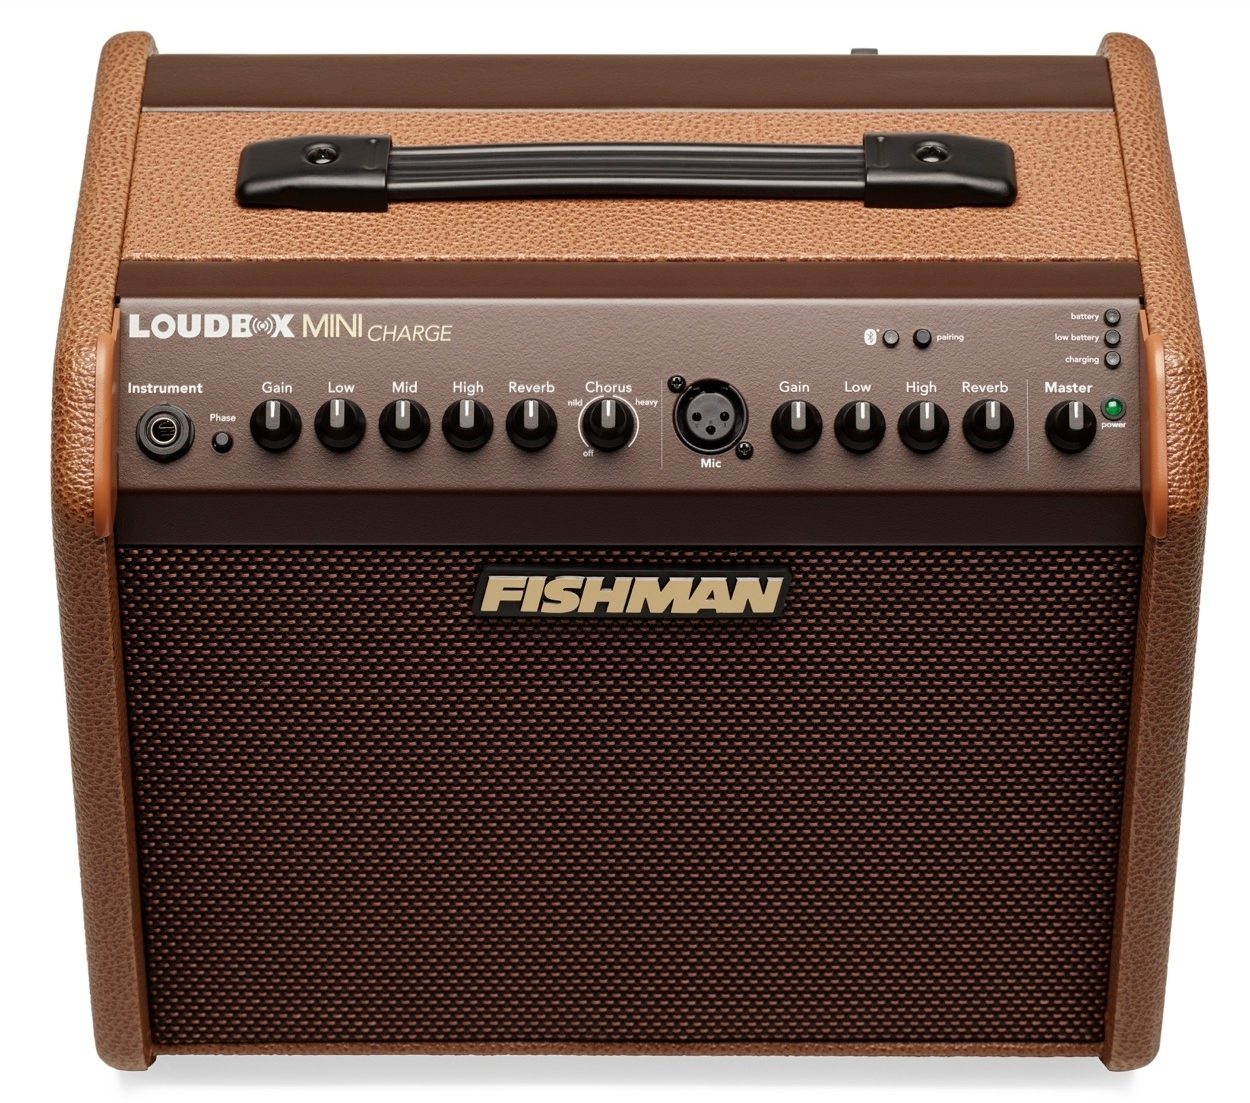 Fishman Loudbox Mini Charge Battery-Powered Acoustic Guitar Combo Amplifier  with Bluetooth (60 Watts)